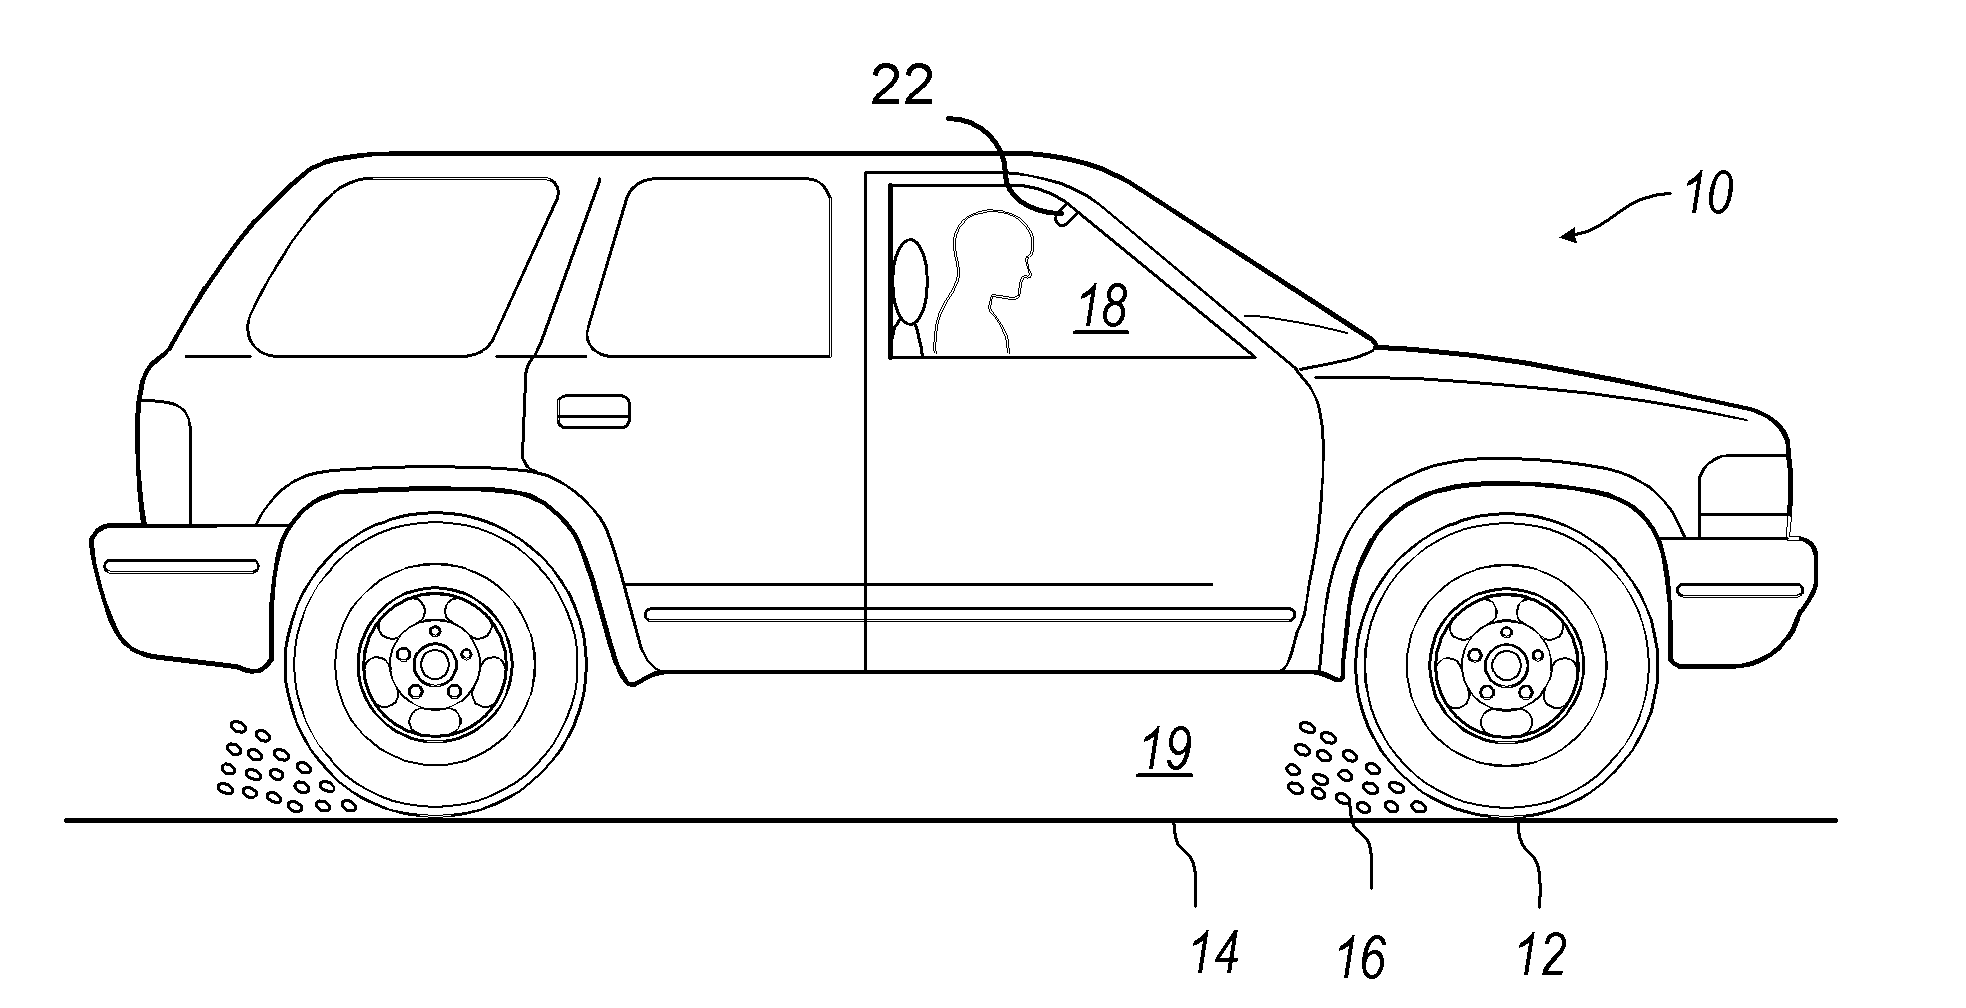 Method and System for Identifying Wet Pavement Using Tire Noise